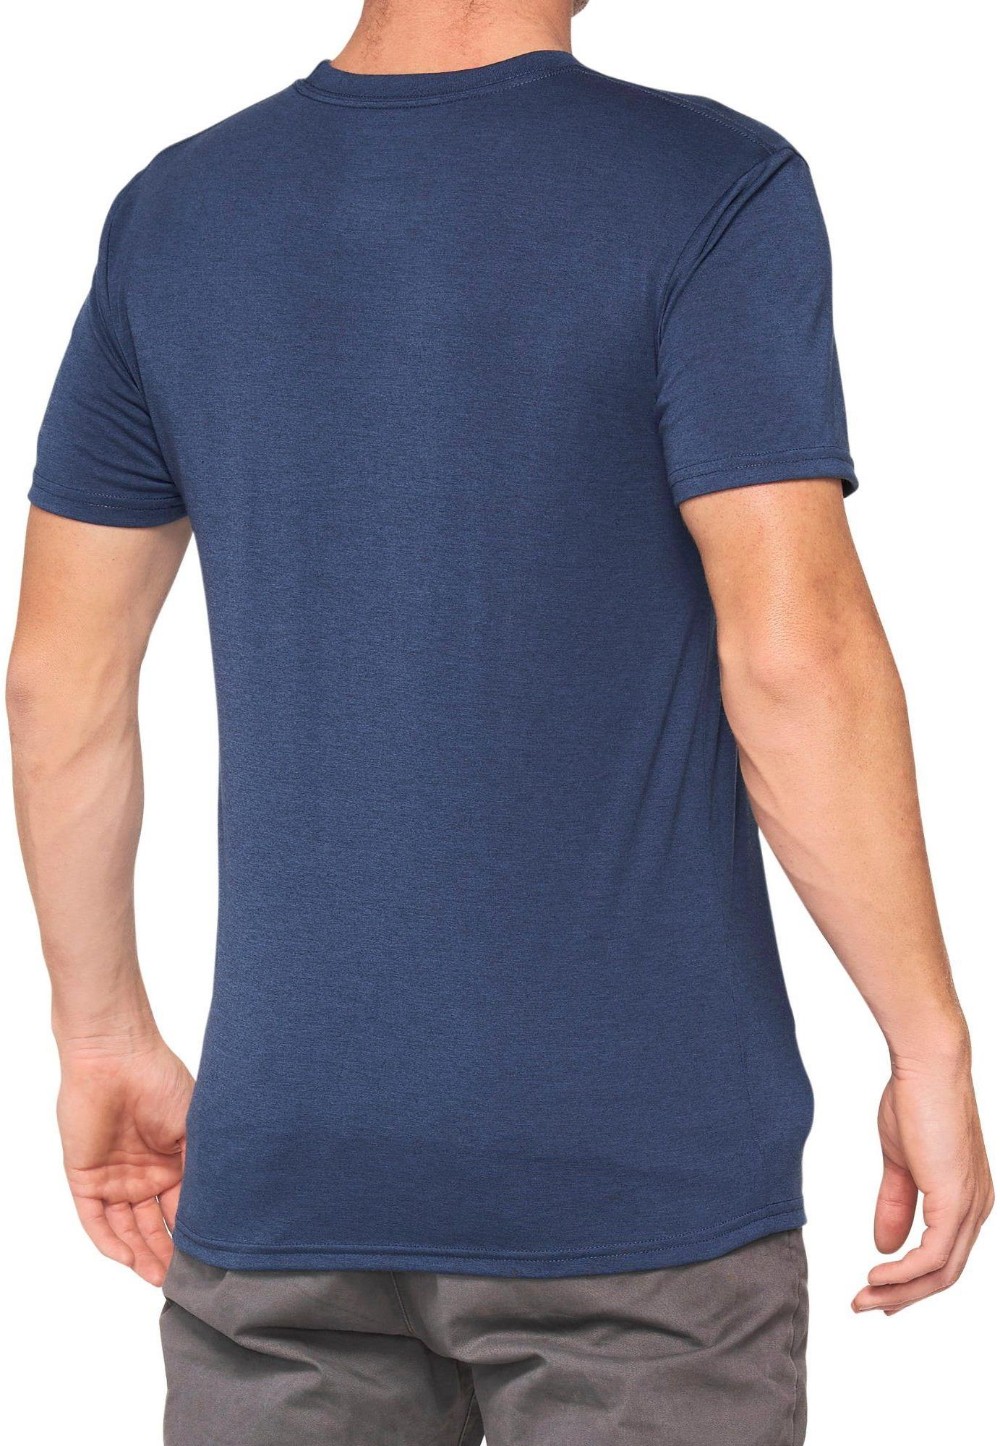 Cropped Short Sleeve Tech Tee image 1